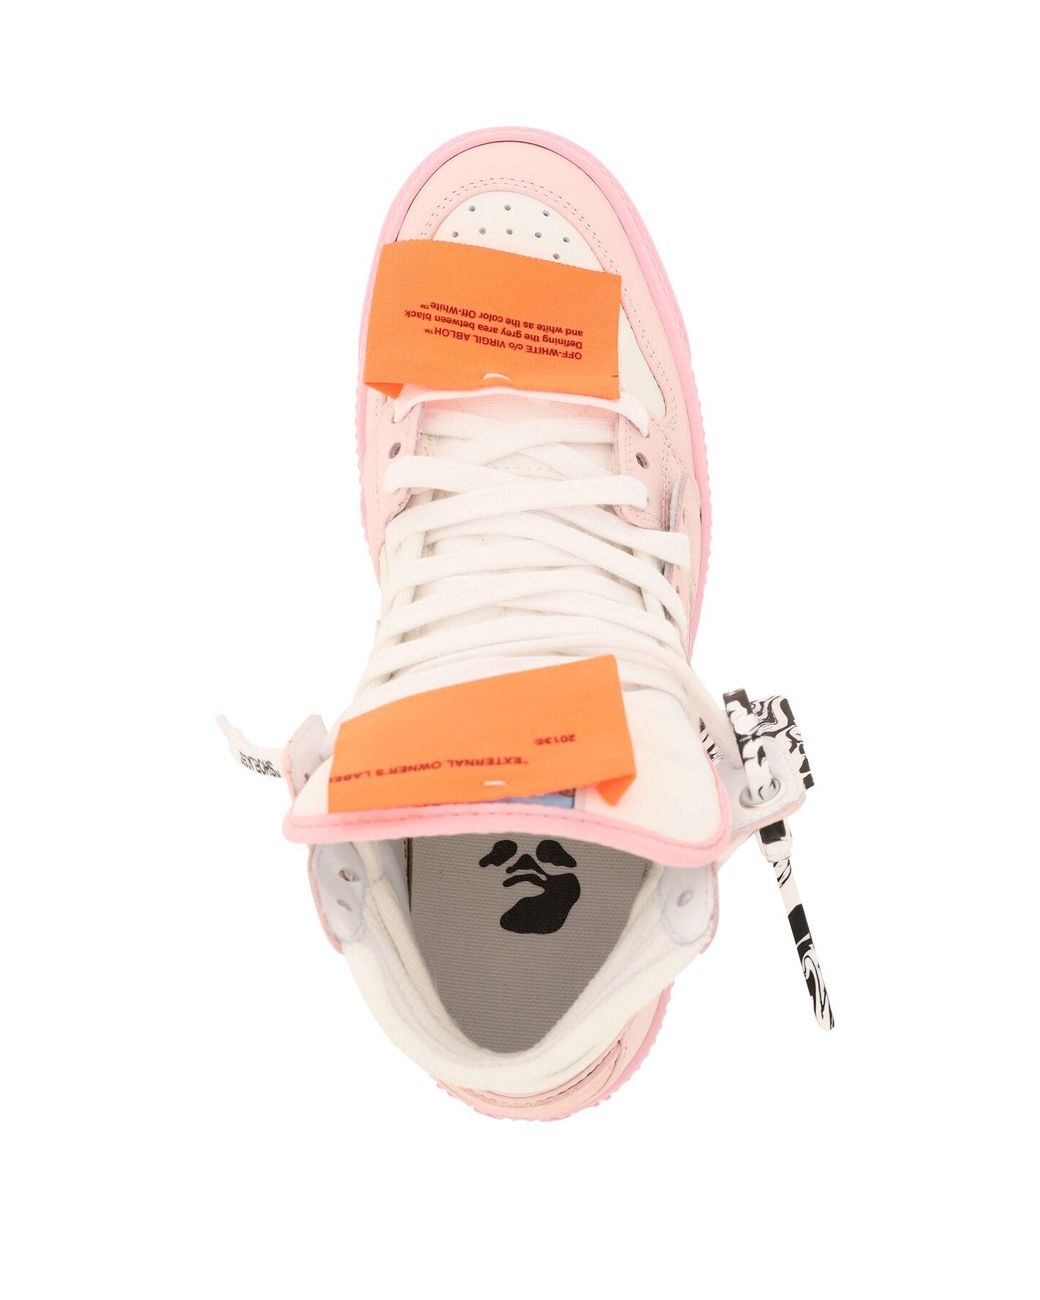 Off-White Virgil Abloh Off Court 3.0 Women's Sneakers Size 12 US / 42  EU Pink